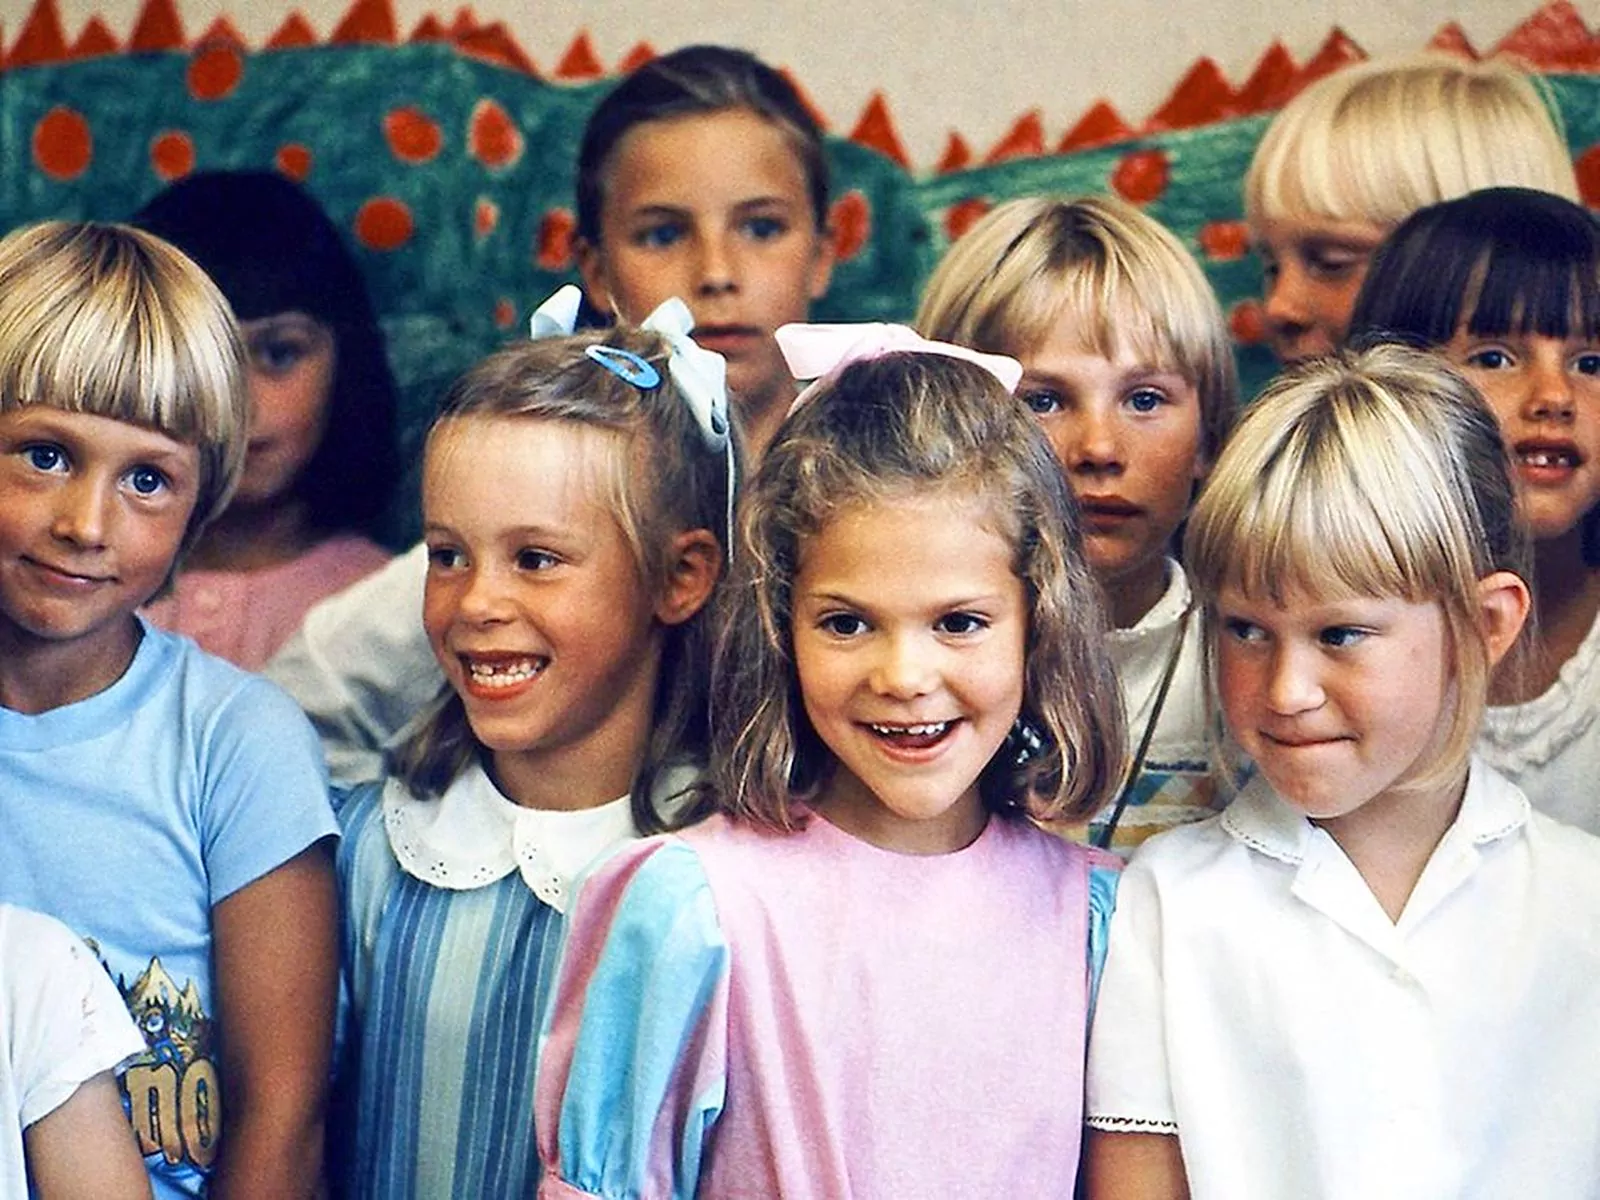 Princess Victoria during her school years